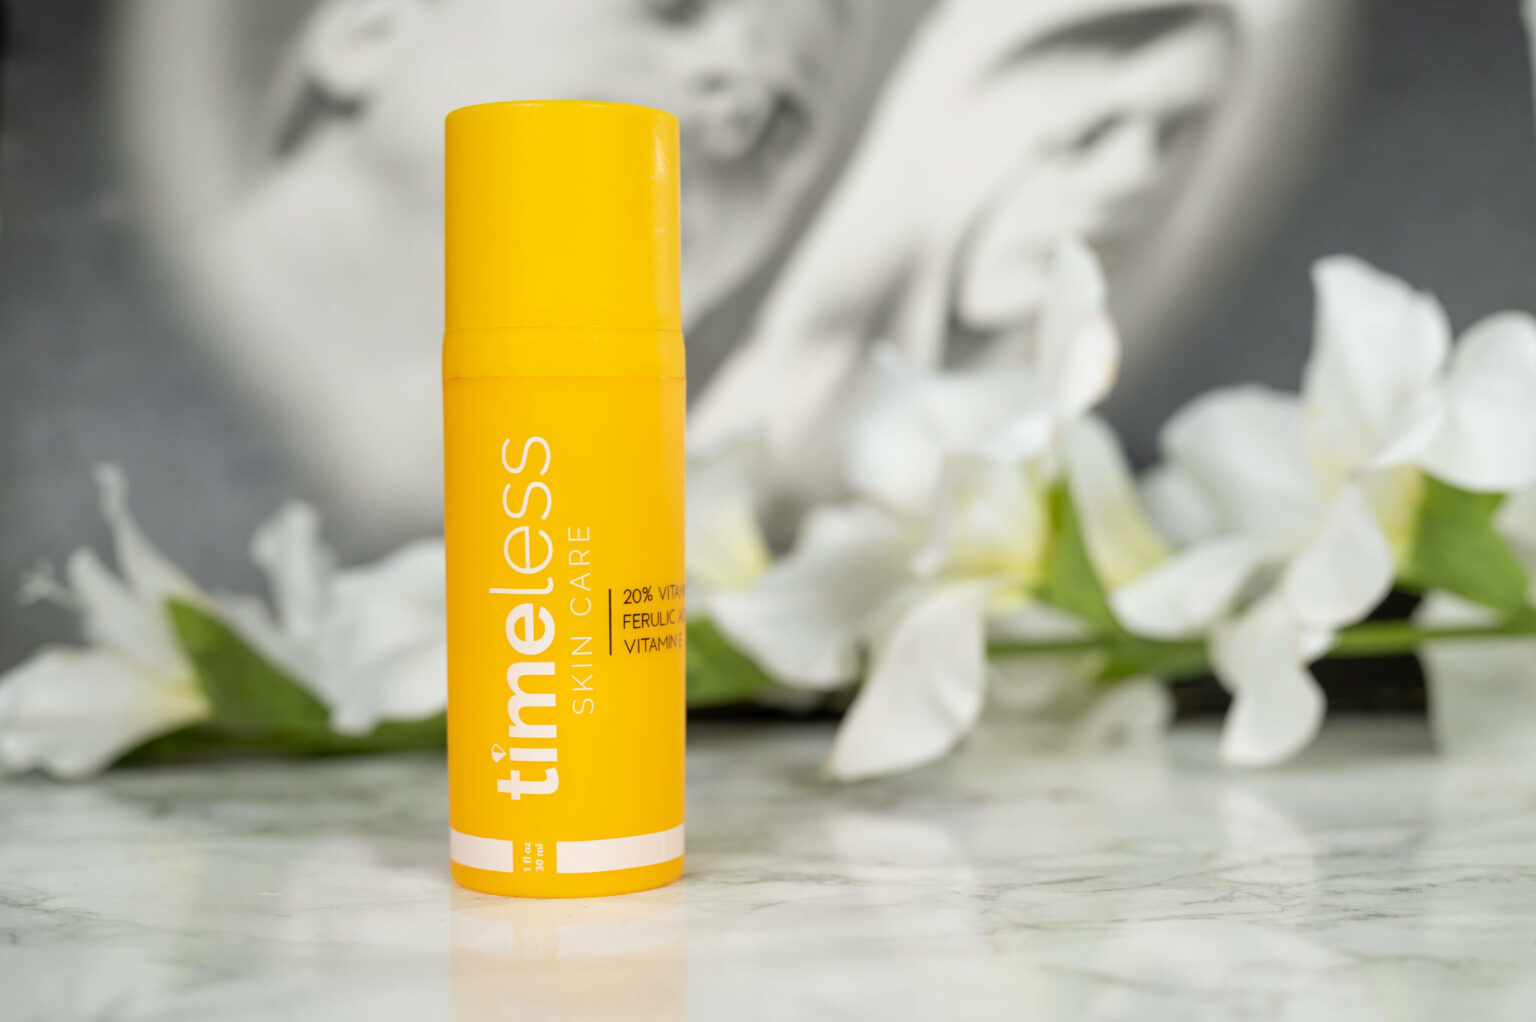 Timeless Vitamin C Serum is a skincare product designed to reduce the signs of aging. Here's how the serum can improve your skin.